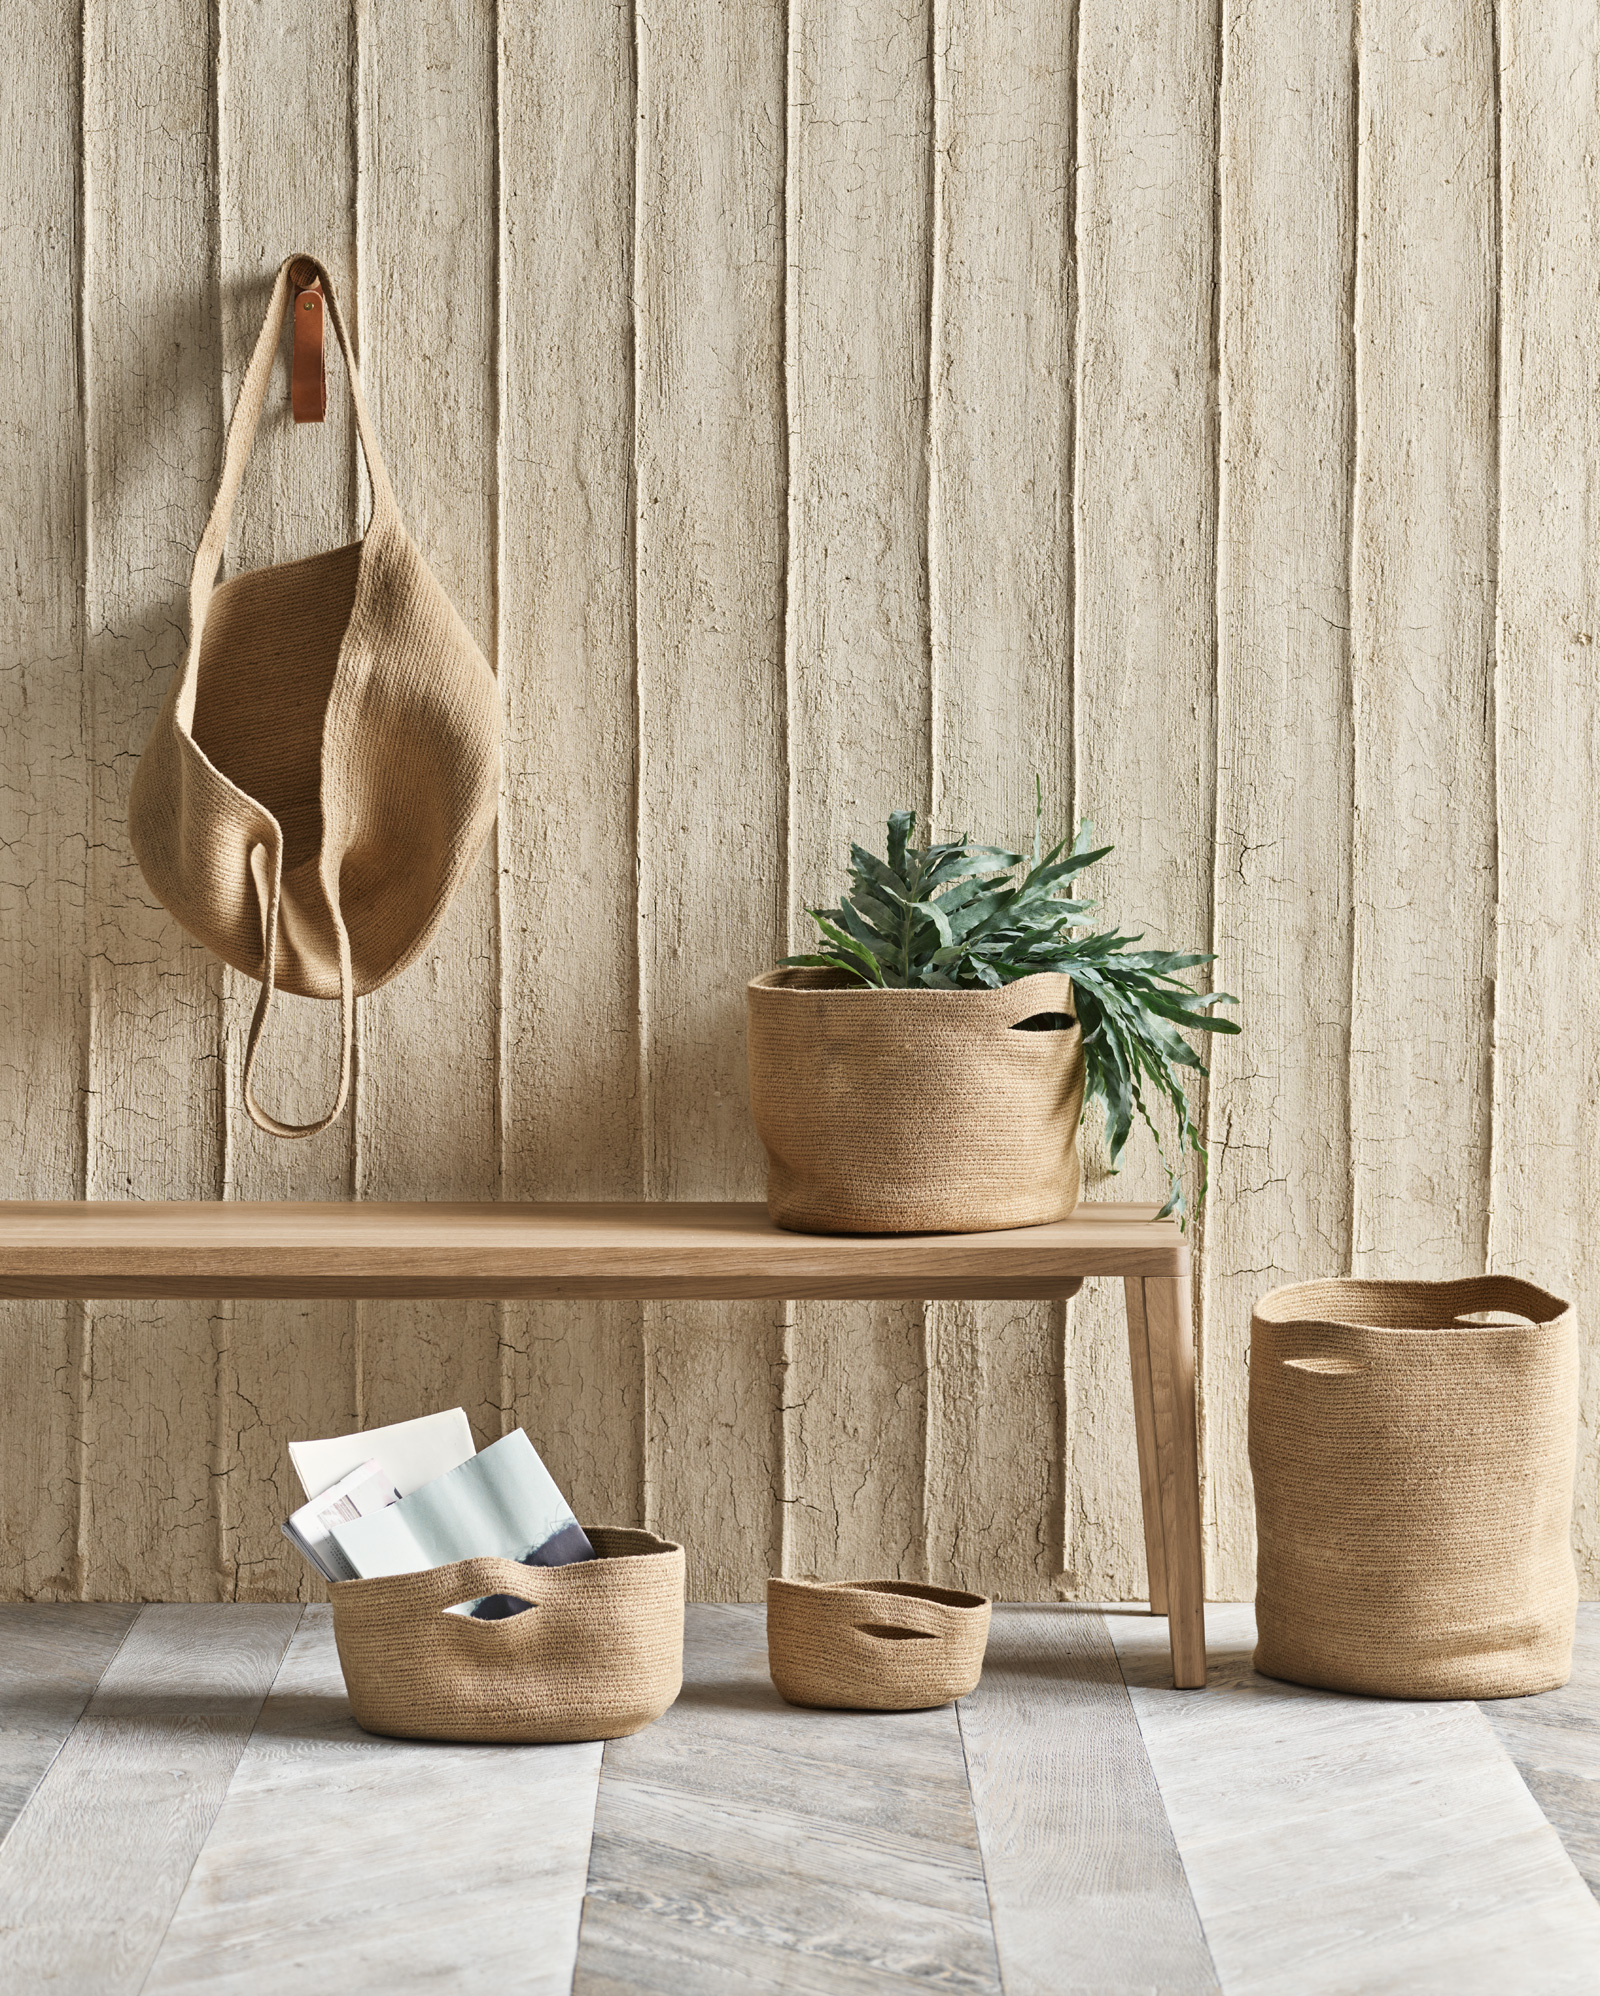 Ribbed basket series for Bolia